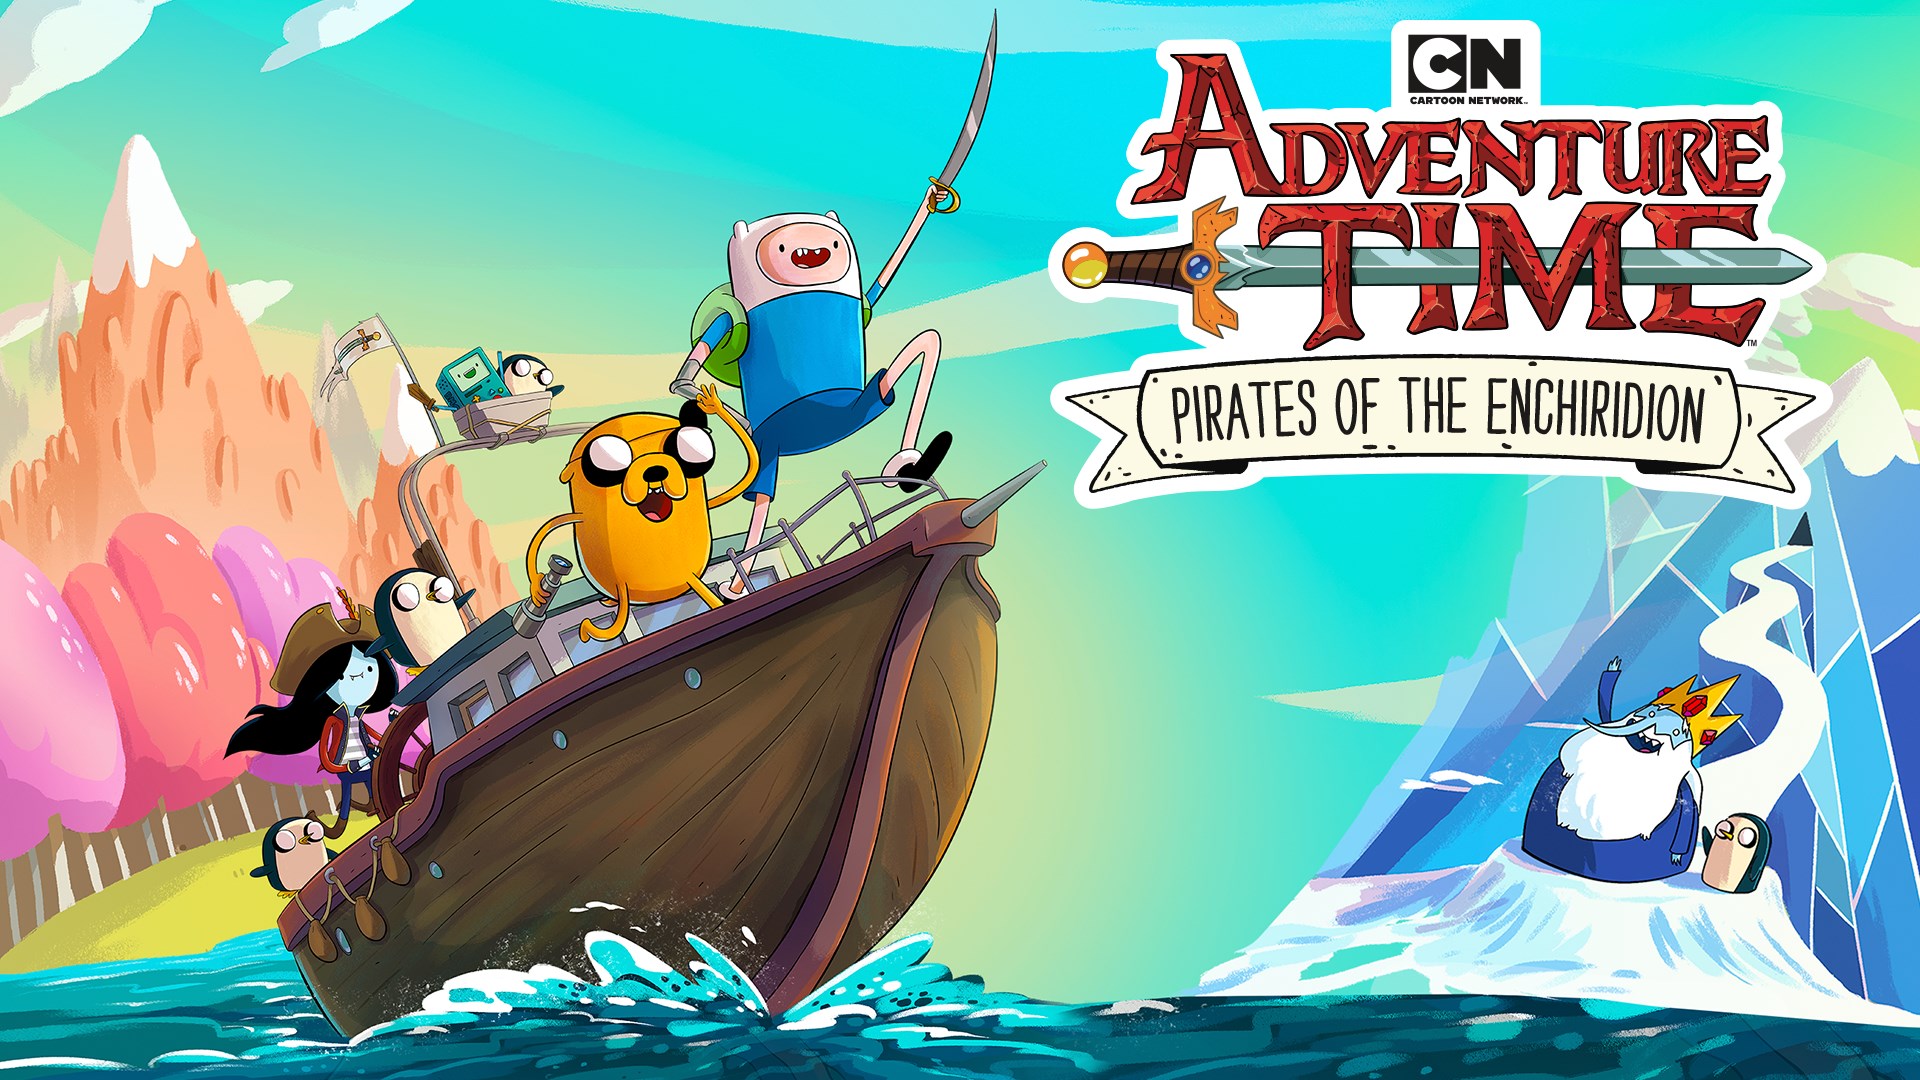 Adventure Time: Pirates of the Enchiridion and Crayola Scoot